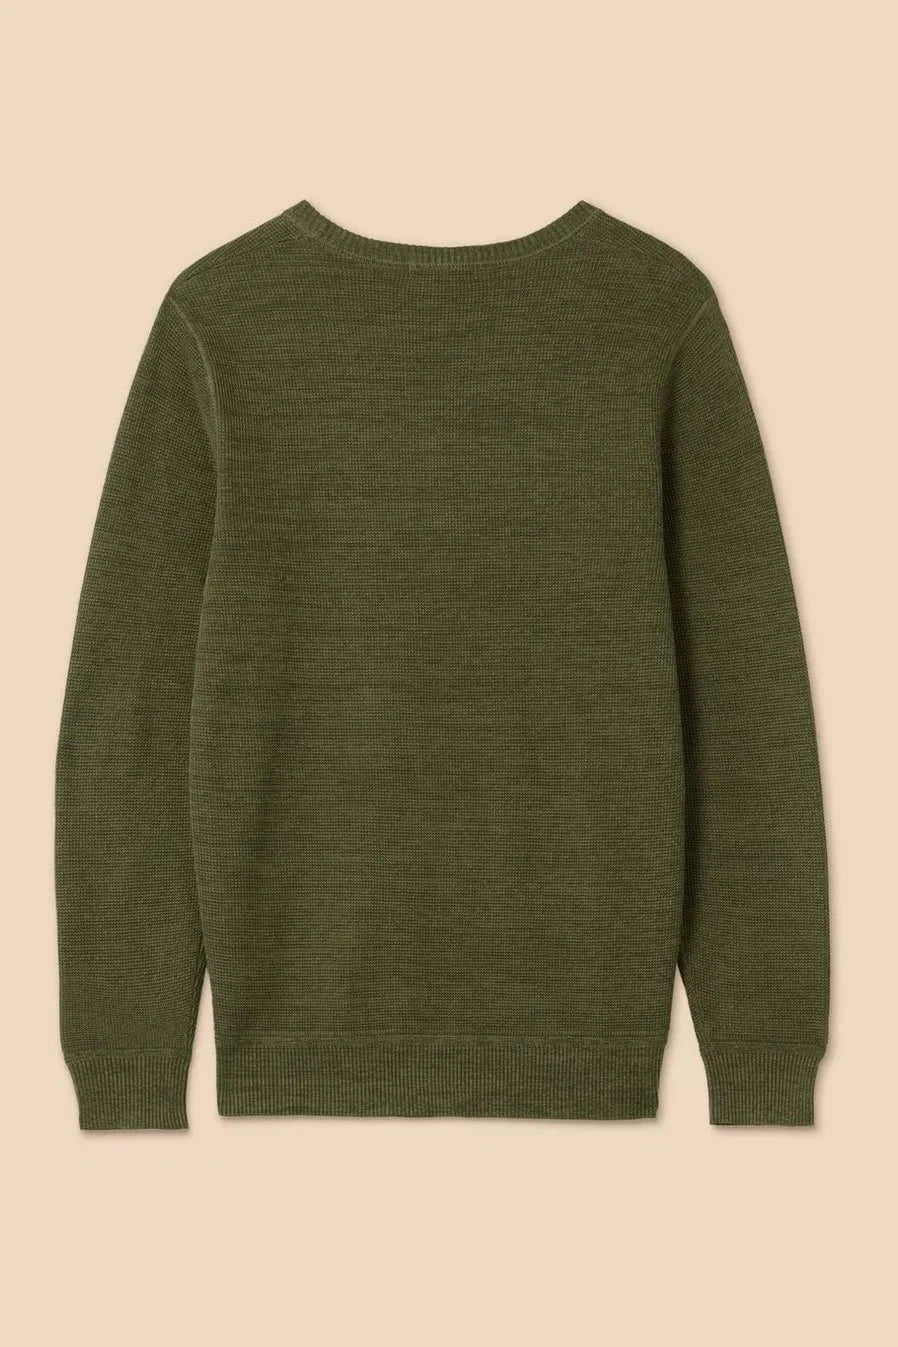 White Stuff Attadale Crew Neck Khaki Green Jumper-Mens-Ohh! By Gum - Shop Sustainable